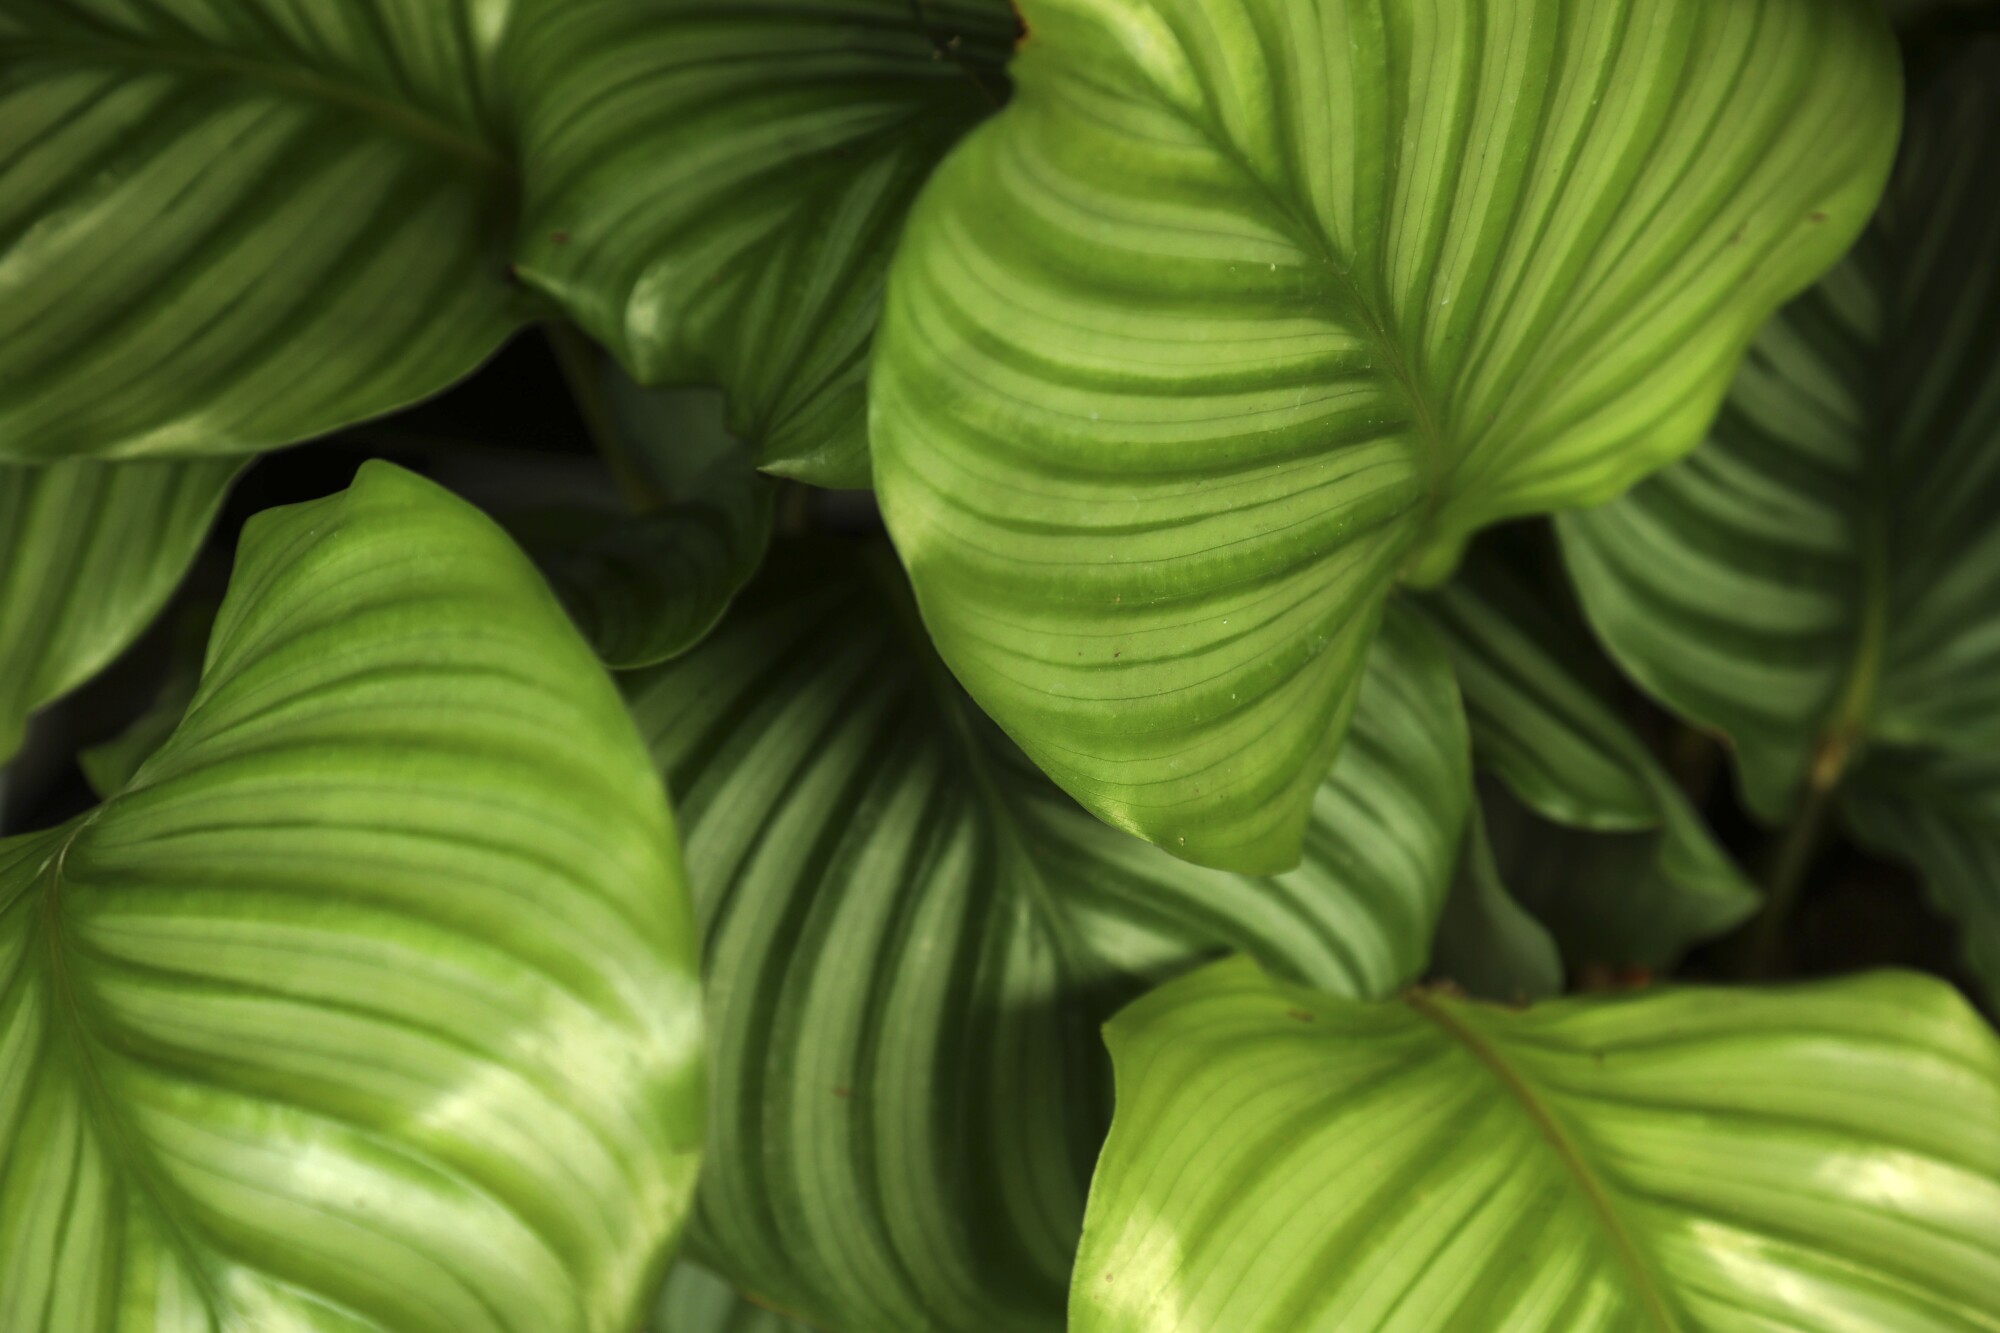 A detail image of striped leaves of a green, leafy Calathea Orbifolia plant.